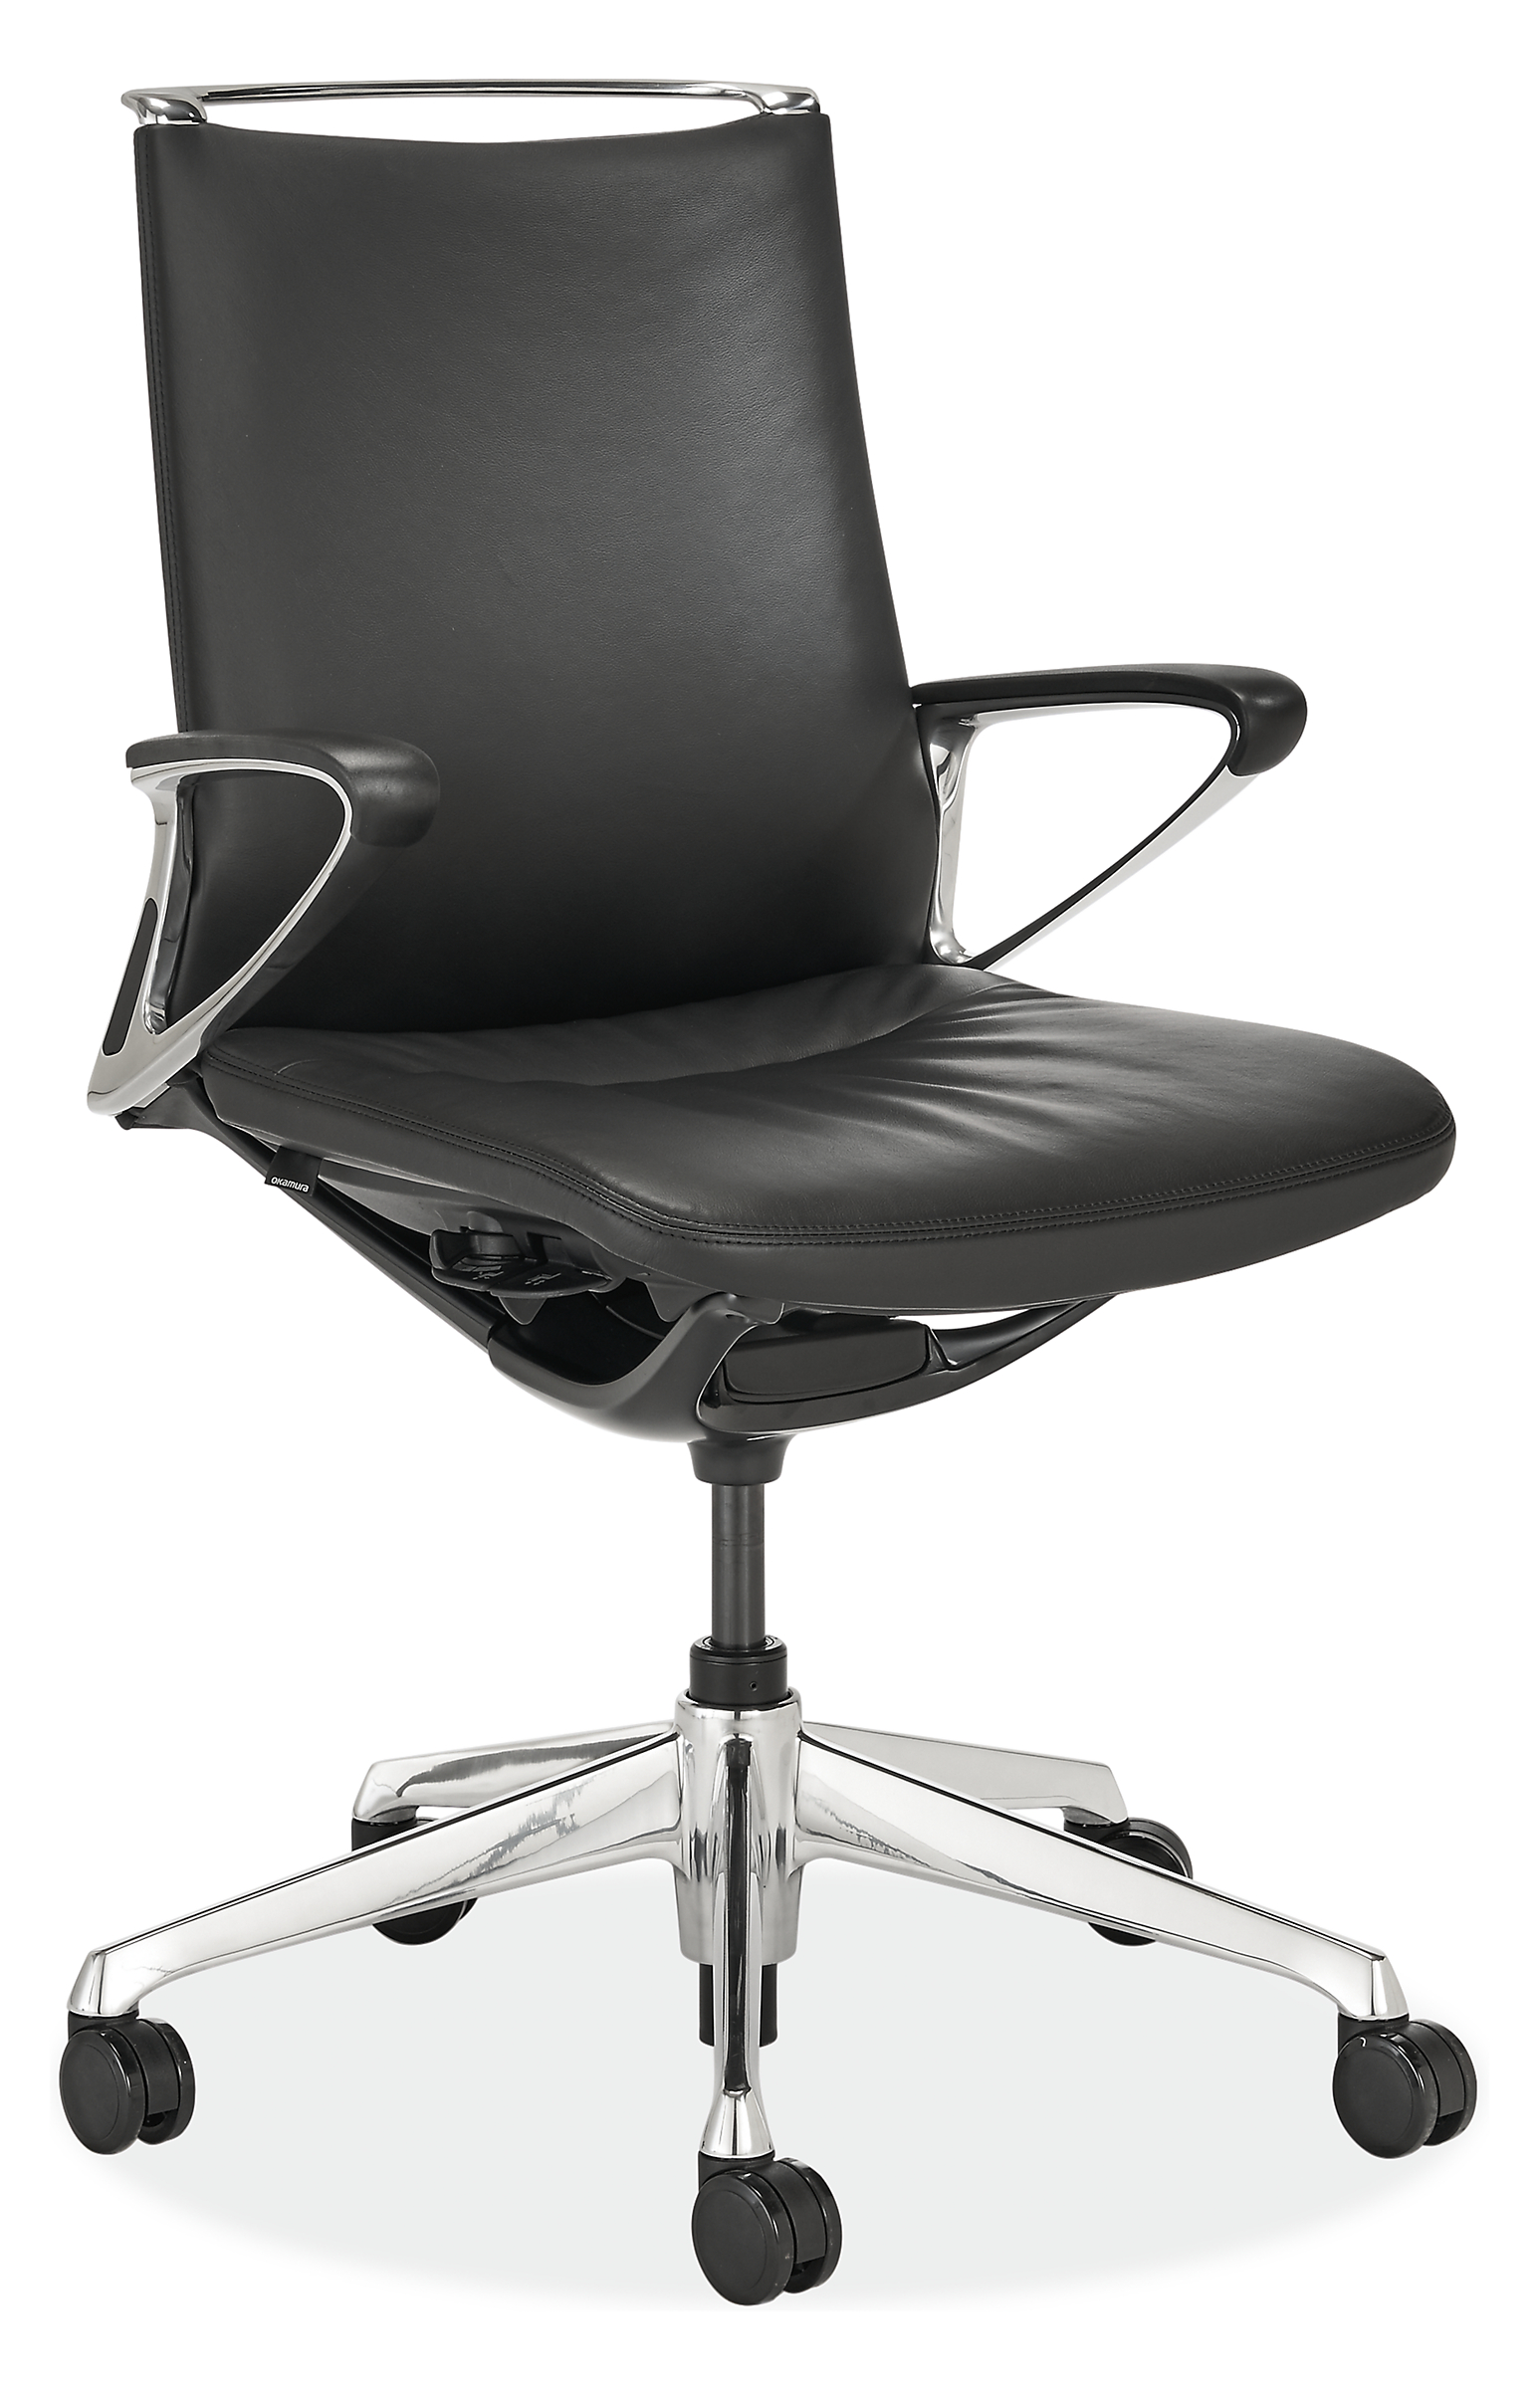 Plimode® Office Chair in Polished Aluminum with Black Leather